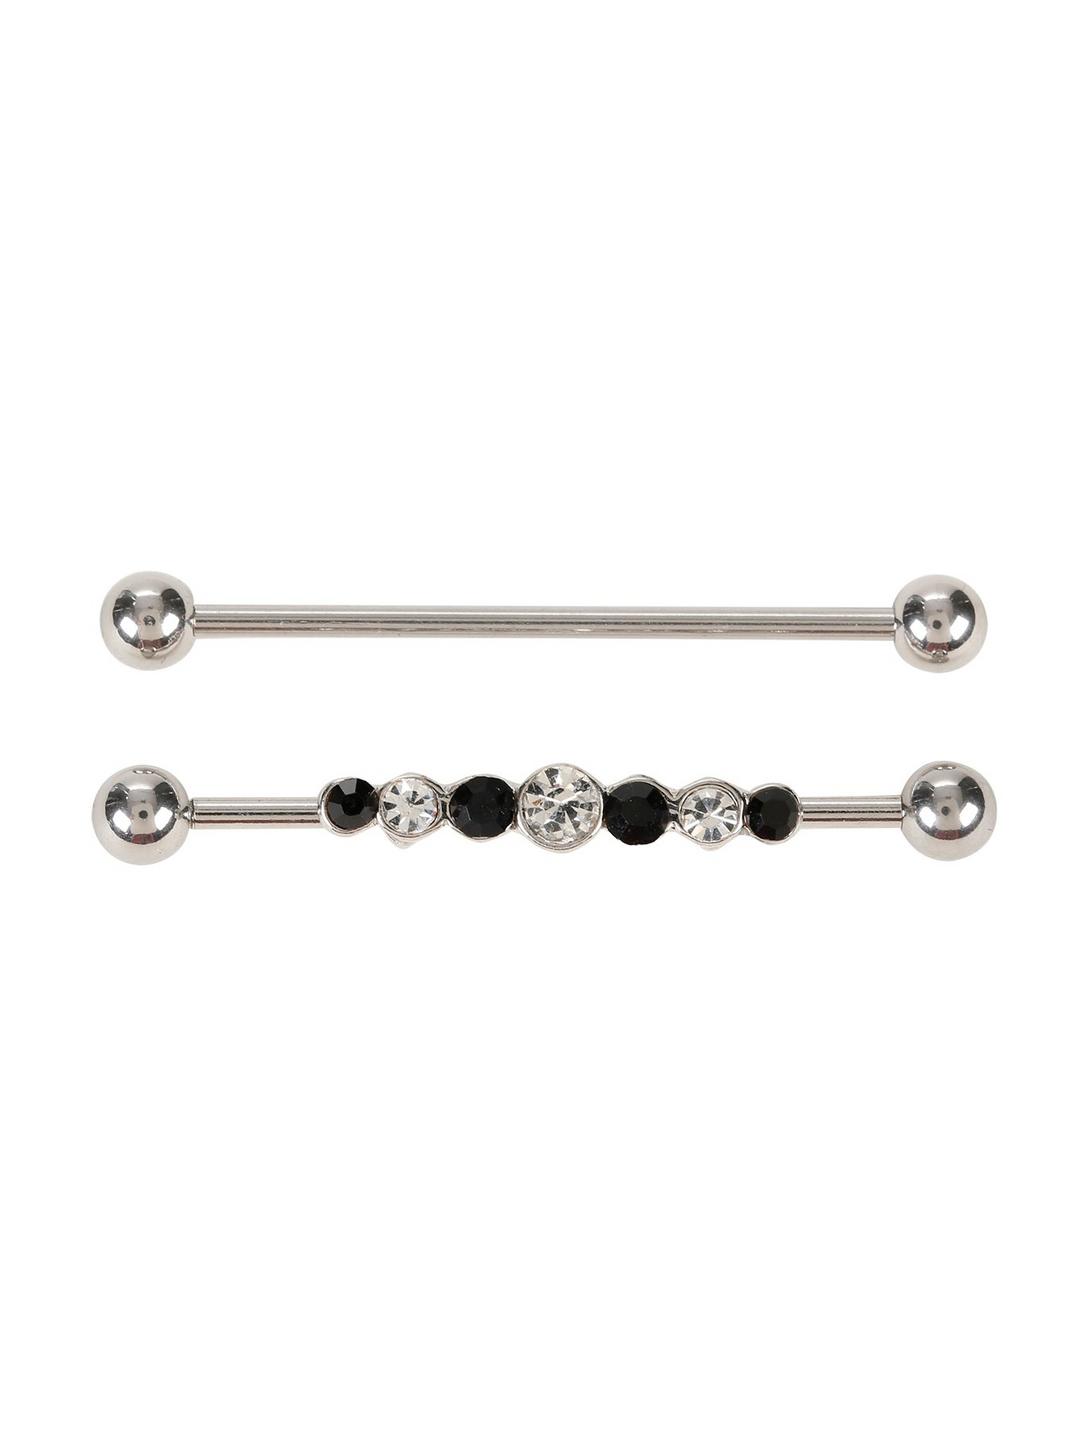 14G Steel Black & Clear Lined CZ Industrial Barbell 2 Pack, , hi-res